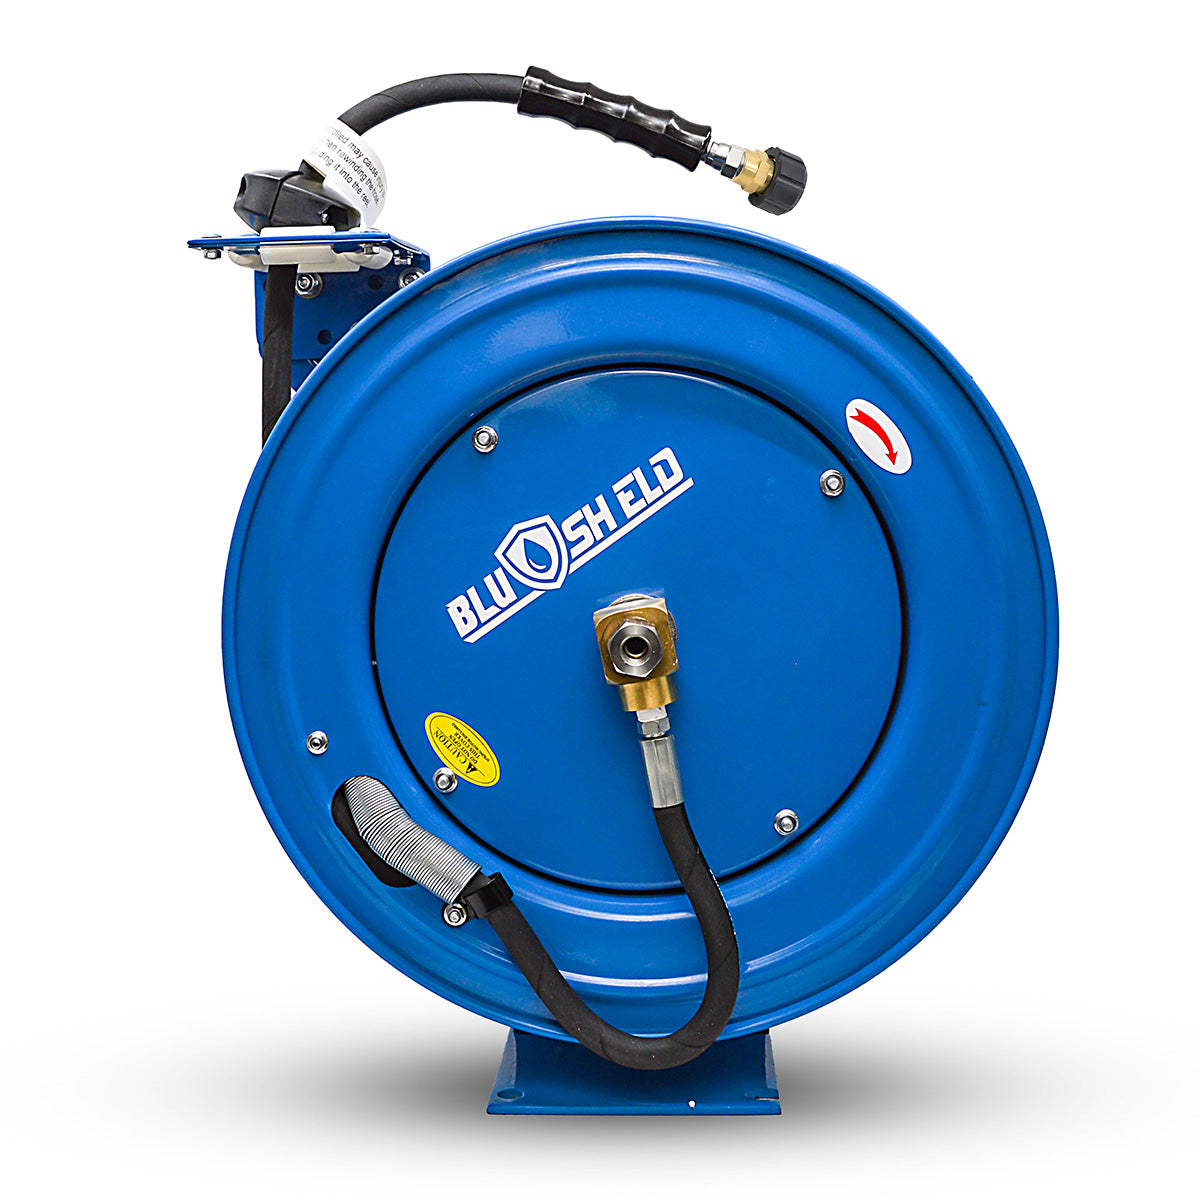 BluShield 1/4" Pressure Washer Retractable Hose Reel with M22, Polyester Braided Hose, 6' Lead-in Hose